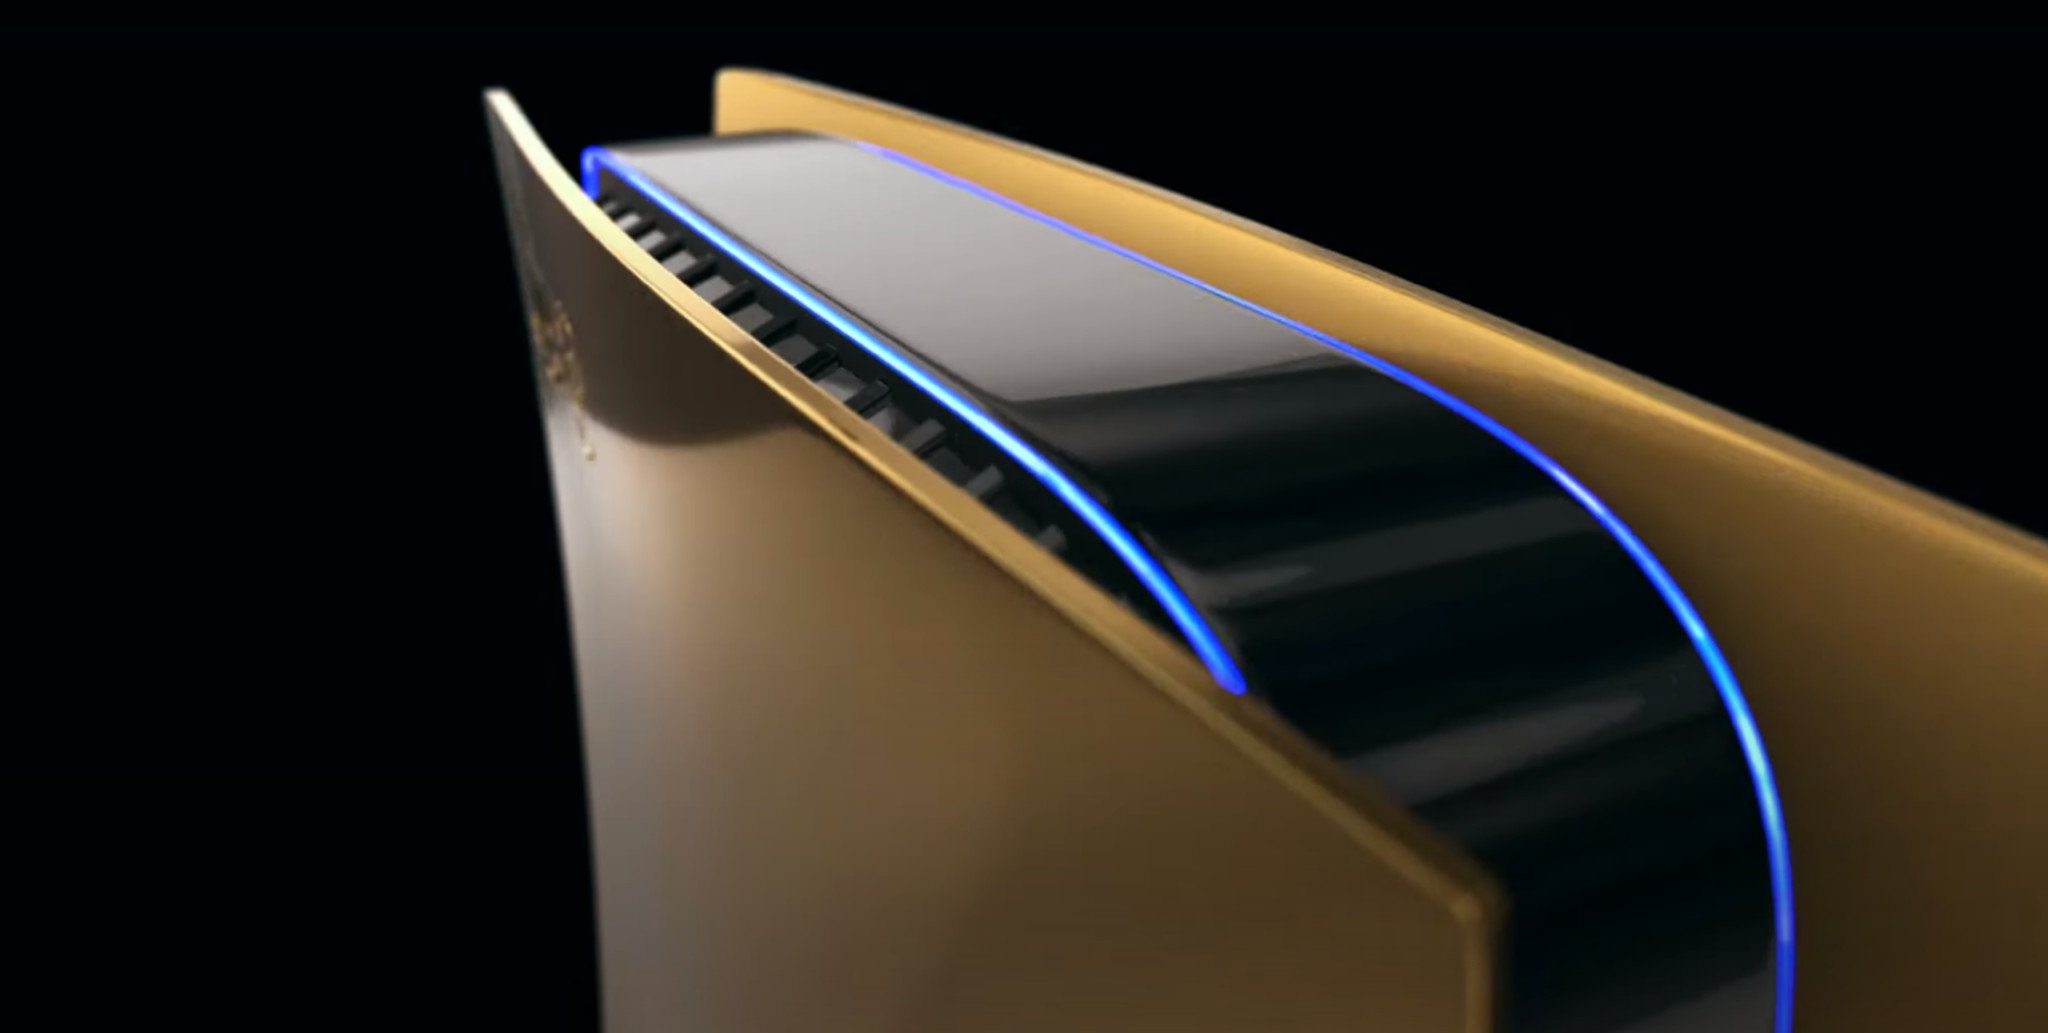 Pre-orders for PS5 will start on September 10, and this 24K gold console  costs £8000